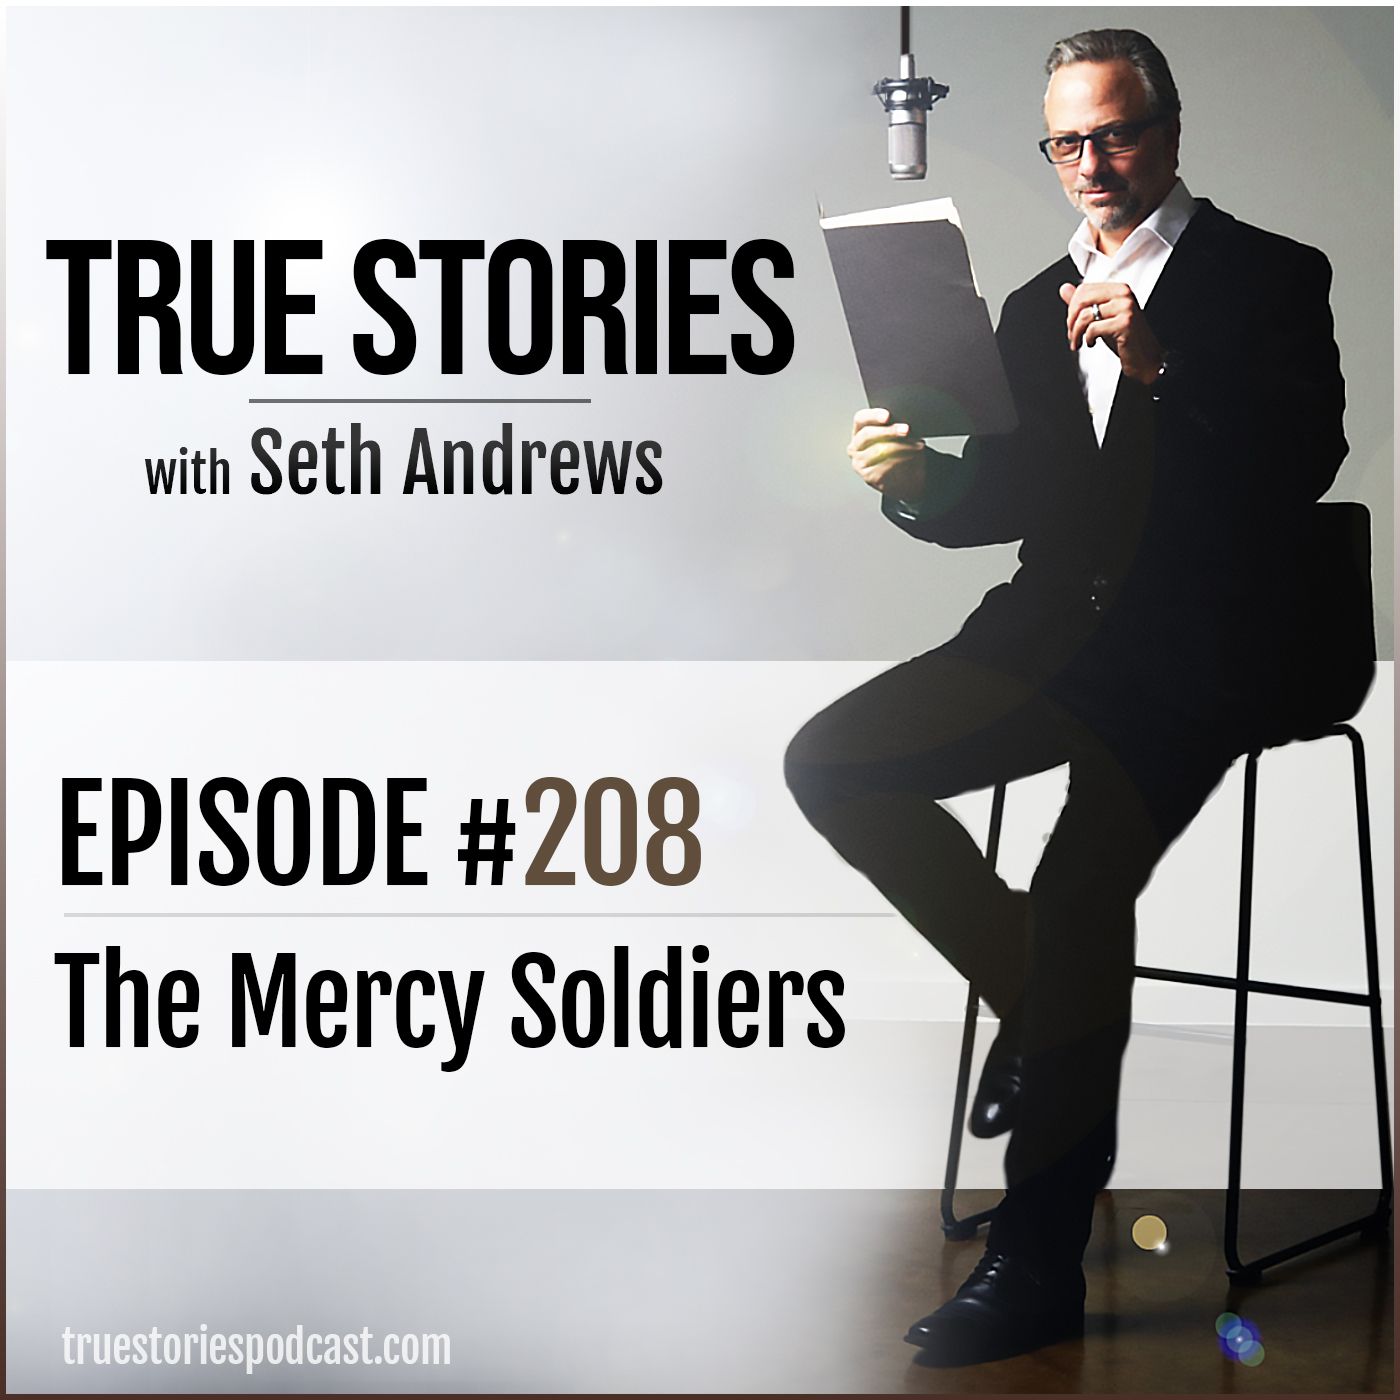 True Stories #208 - The Mercy Soldiers